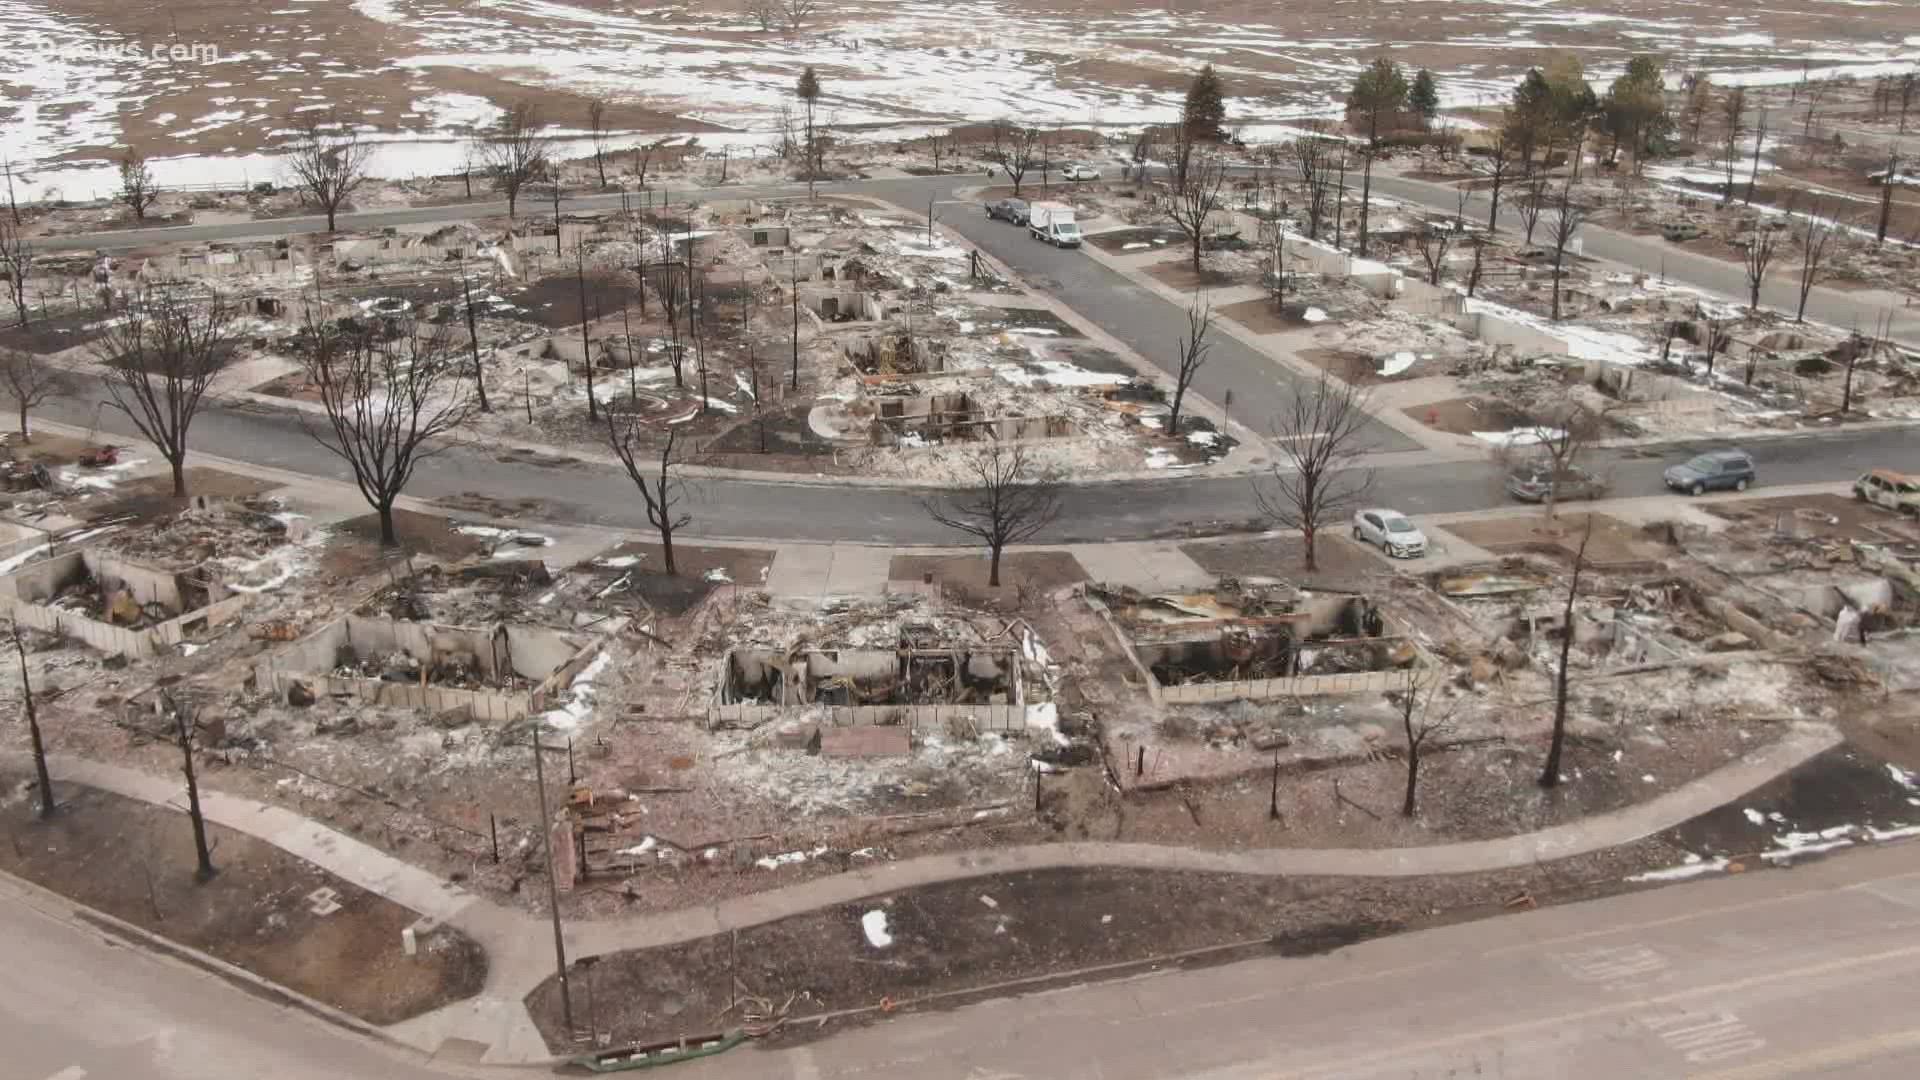 Boulder County on Friday released the schedule for debris removal from the Marshall Fire and which neighborhoods will be prioritized in the program.